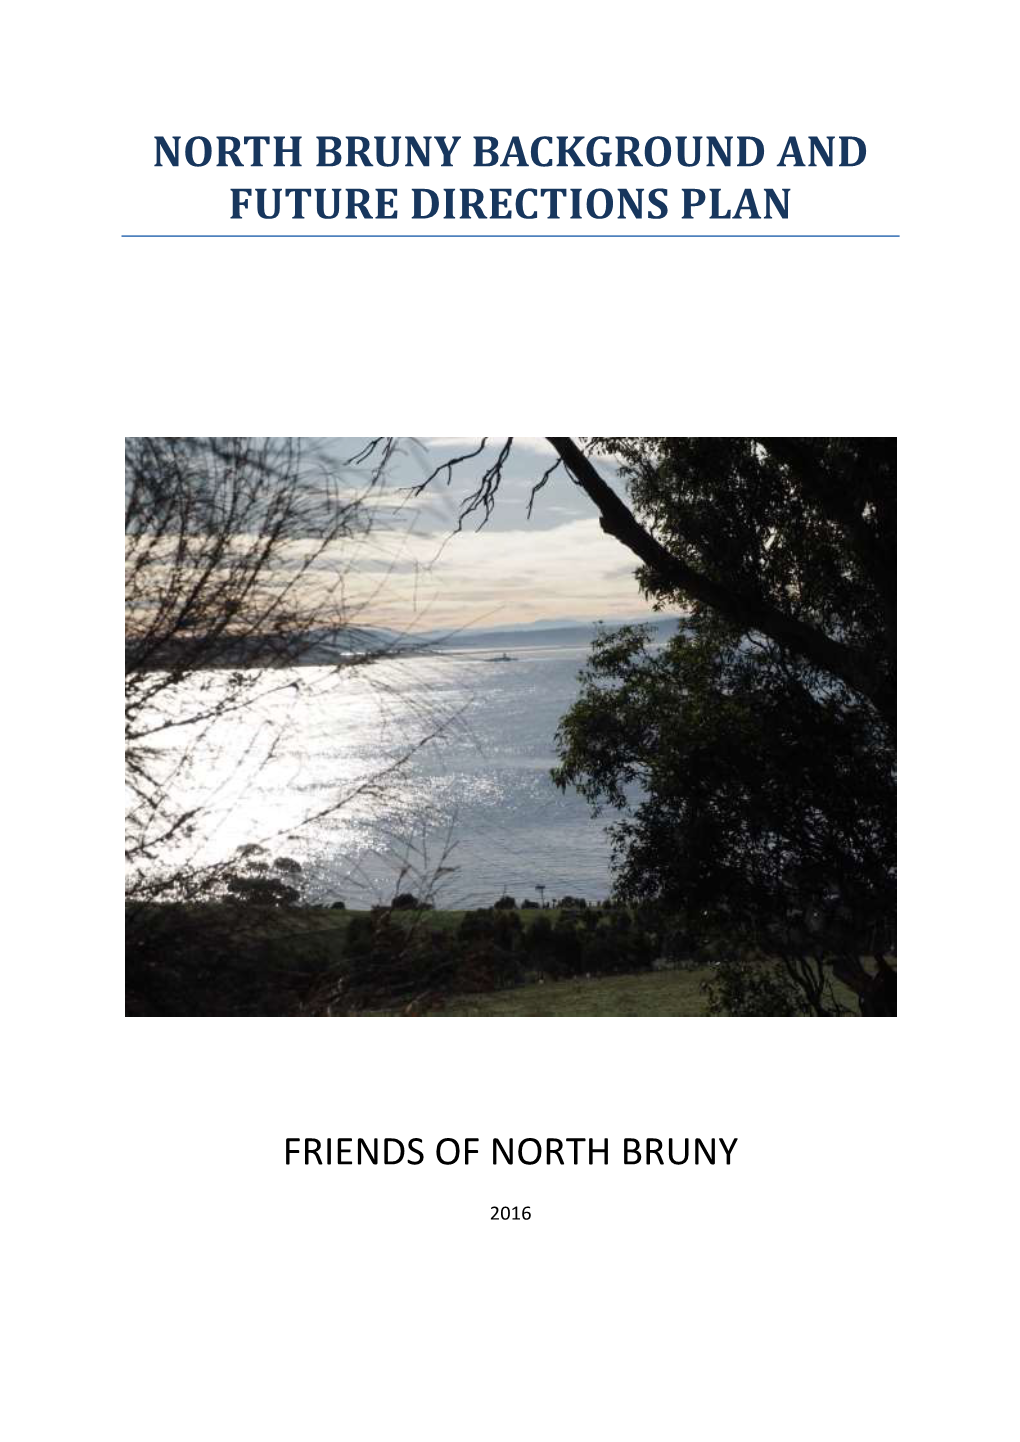 North Bruny Background and Future Directions Plan